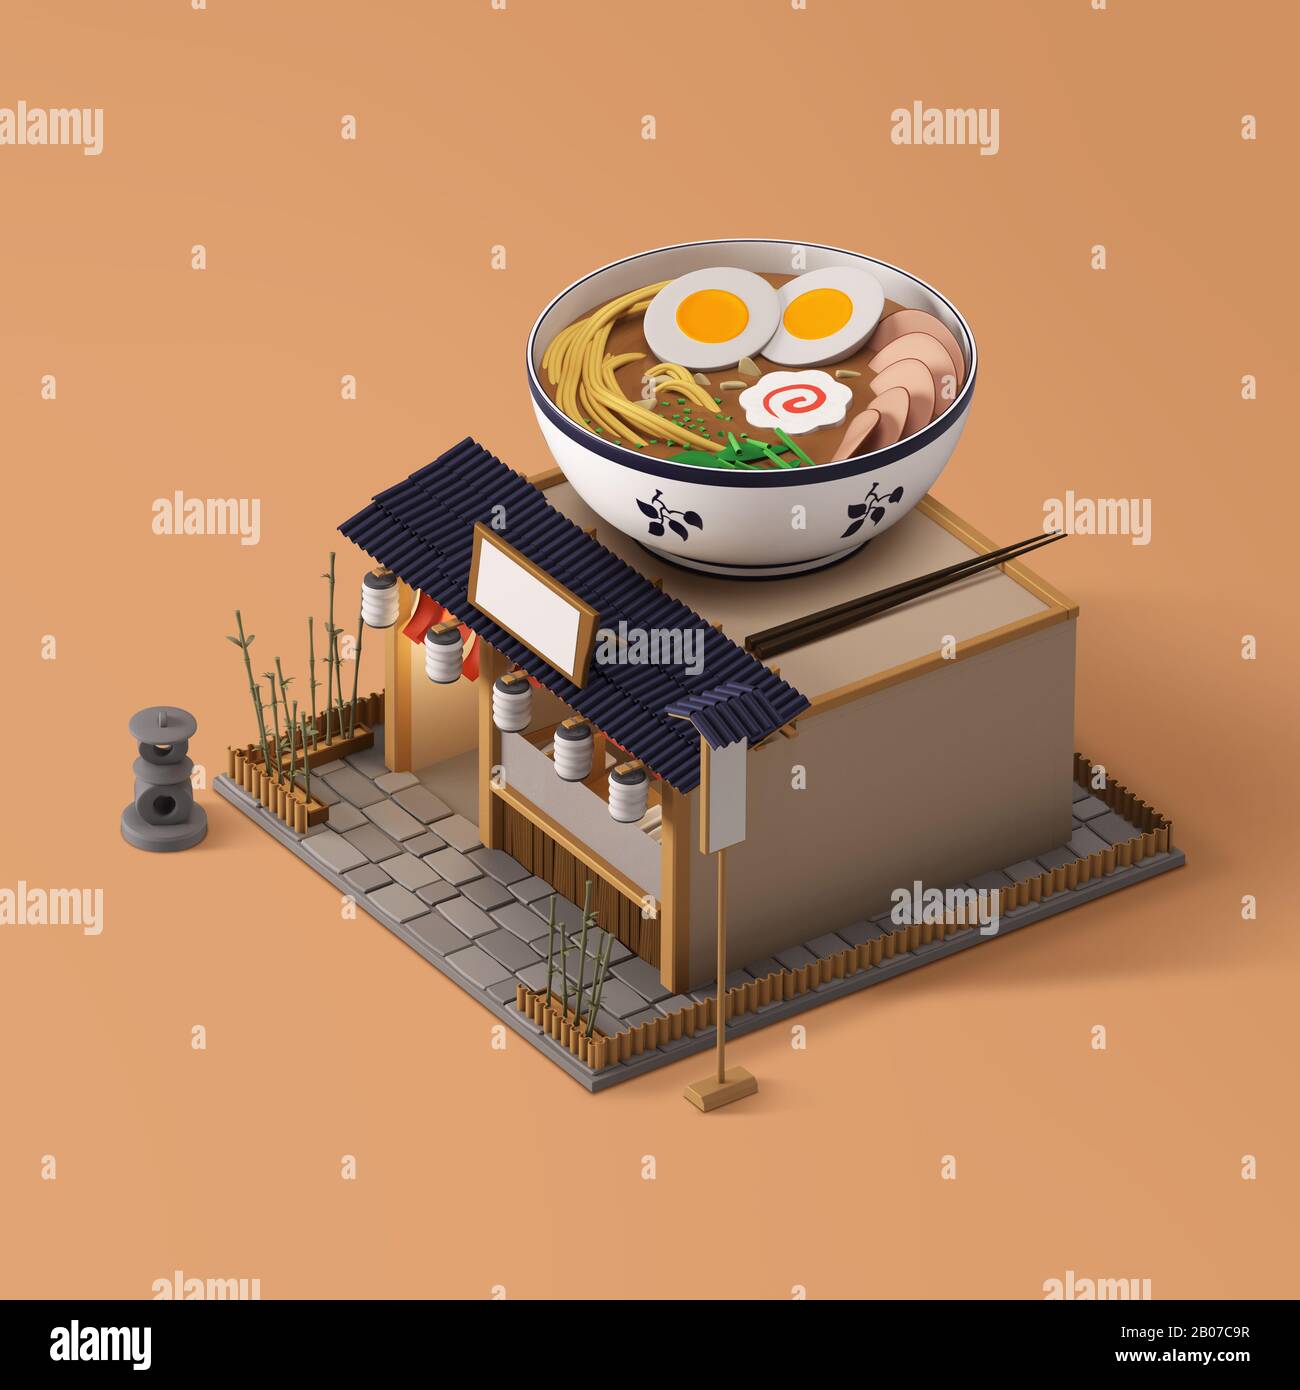 1,077 Naruto Food Images, Stock Photos, 3D objects, & Vectors